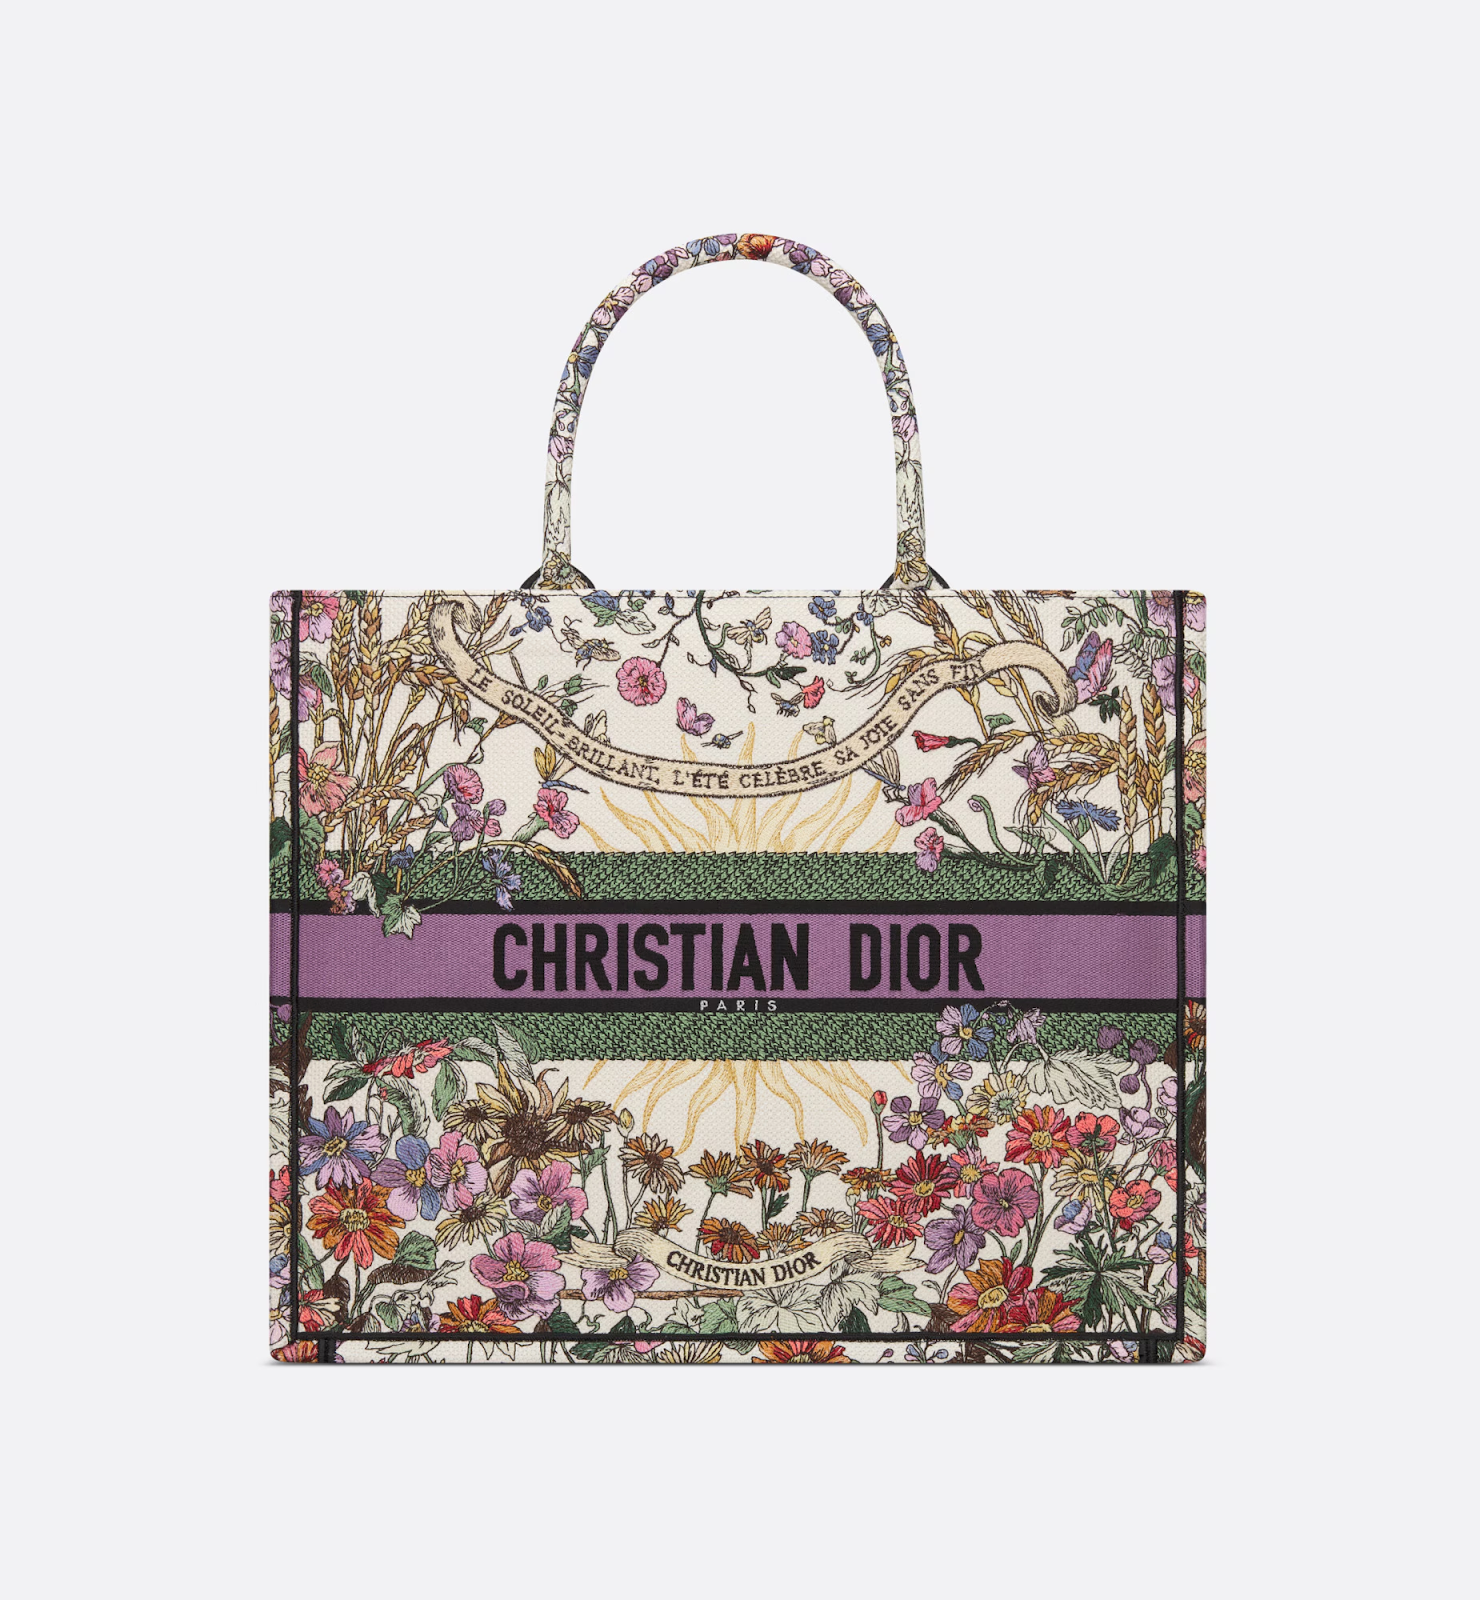 Dior is brand that adds whimsical elements, such as unusual embellishments, seasonal colour schemes, or distinctive stitching in all handbags,